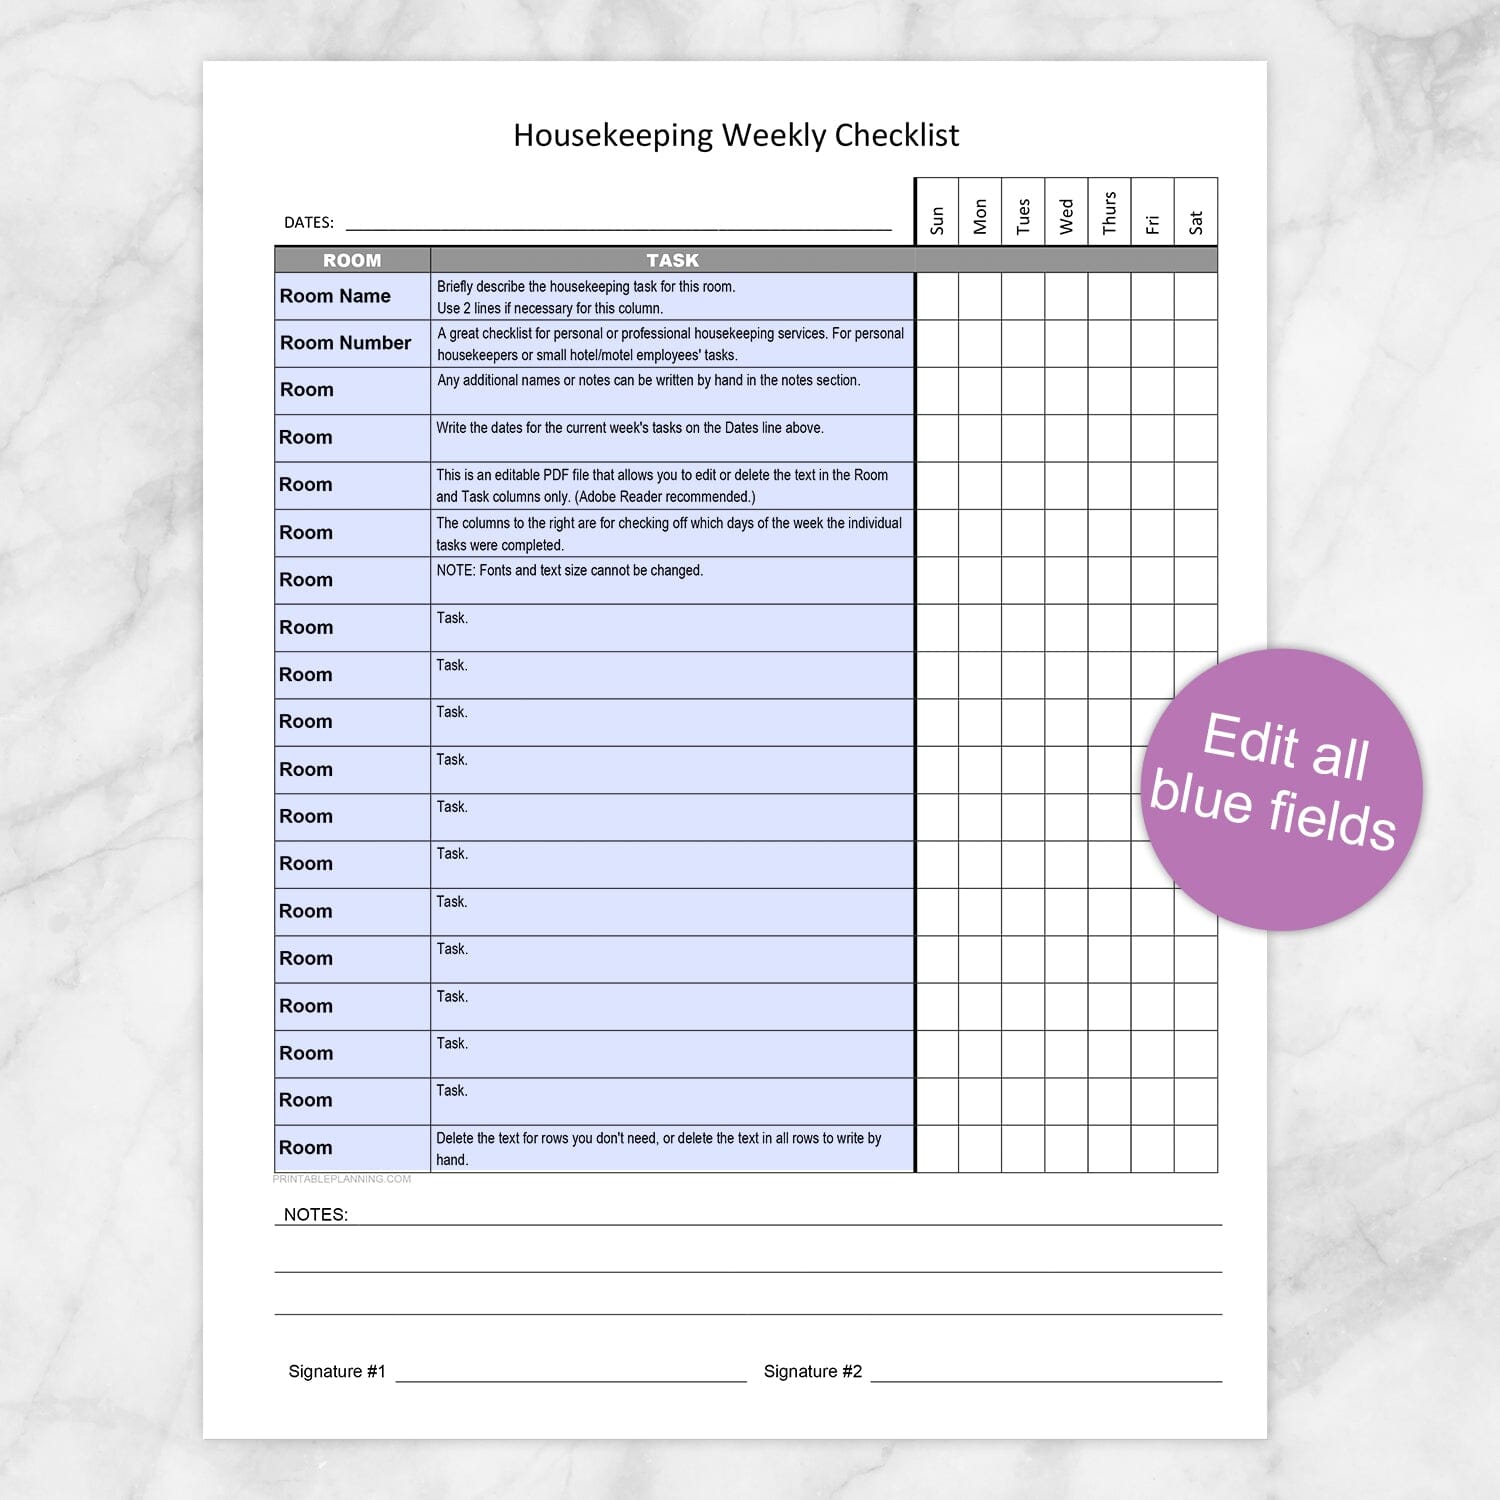 Housekeeping Weekly Checklist - Cleaning Services Editable and - Printable at Planning for only 5.95